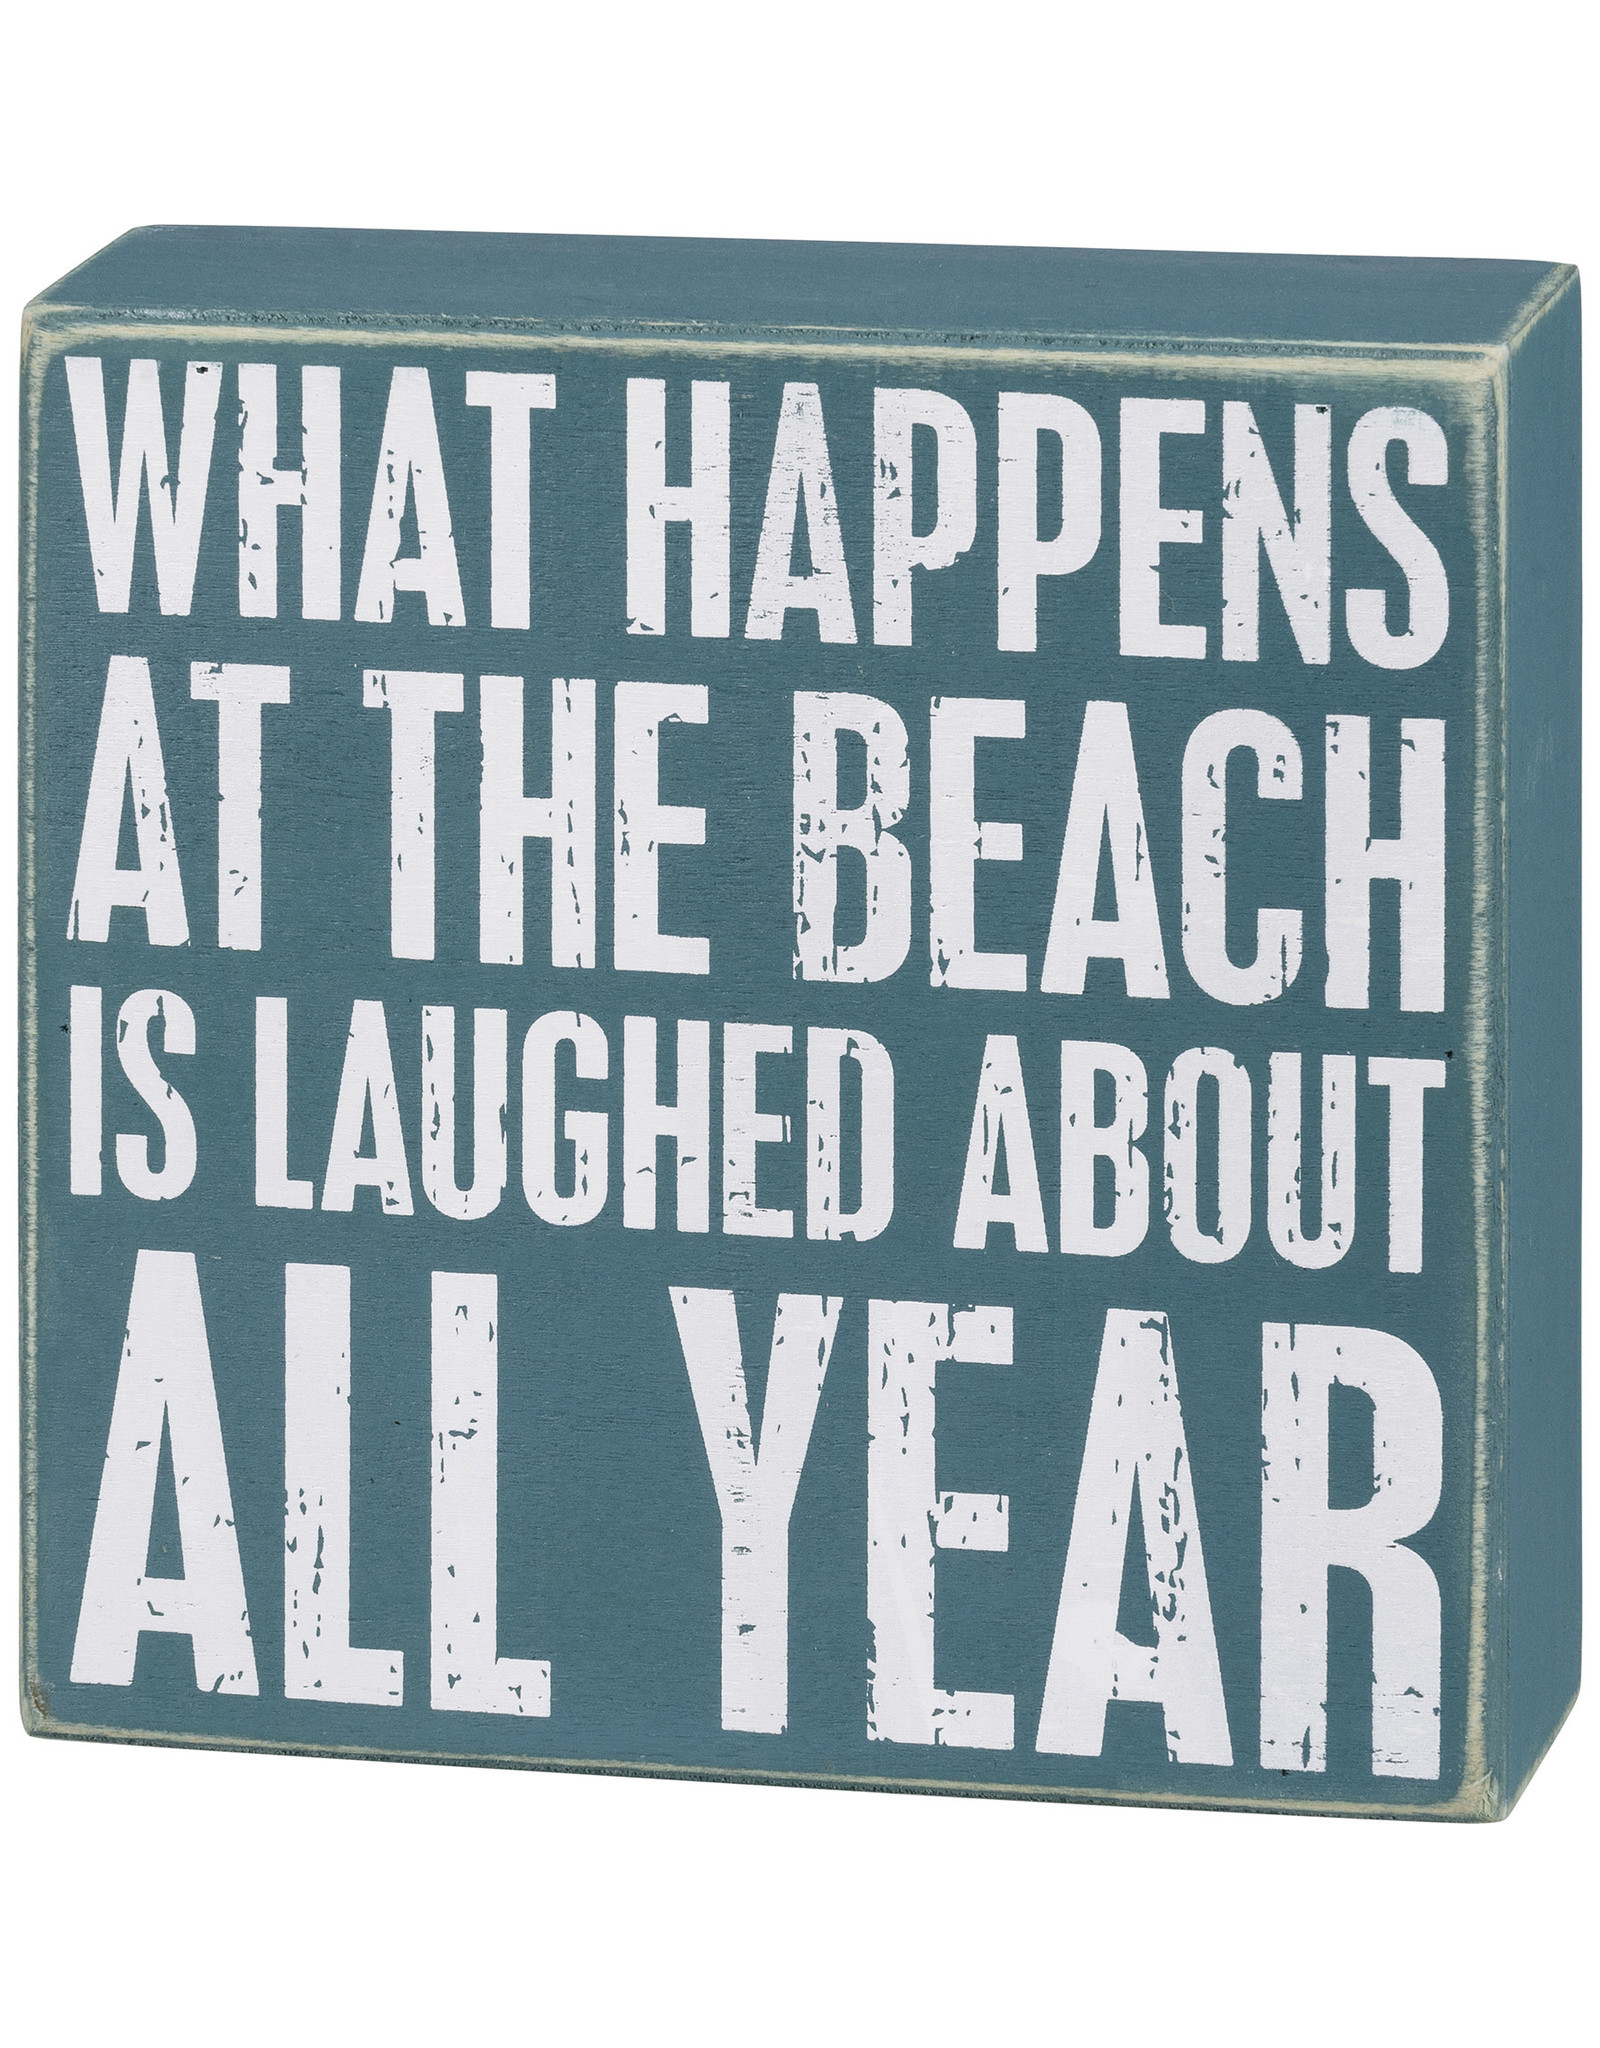 PRIMITIVES BY KATHY BEACH LOVER BLOCK SIGNS WHAT HAPPENS LAUGHED ALL YEAR